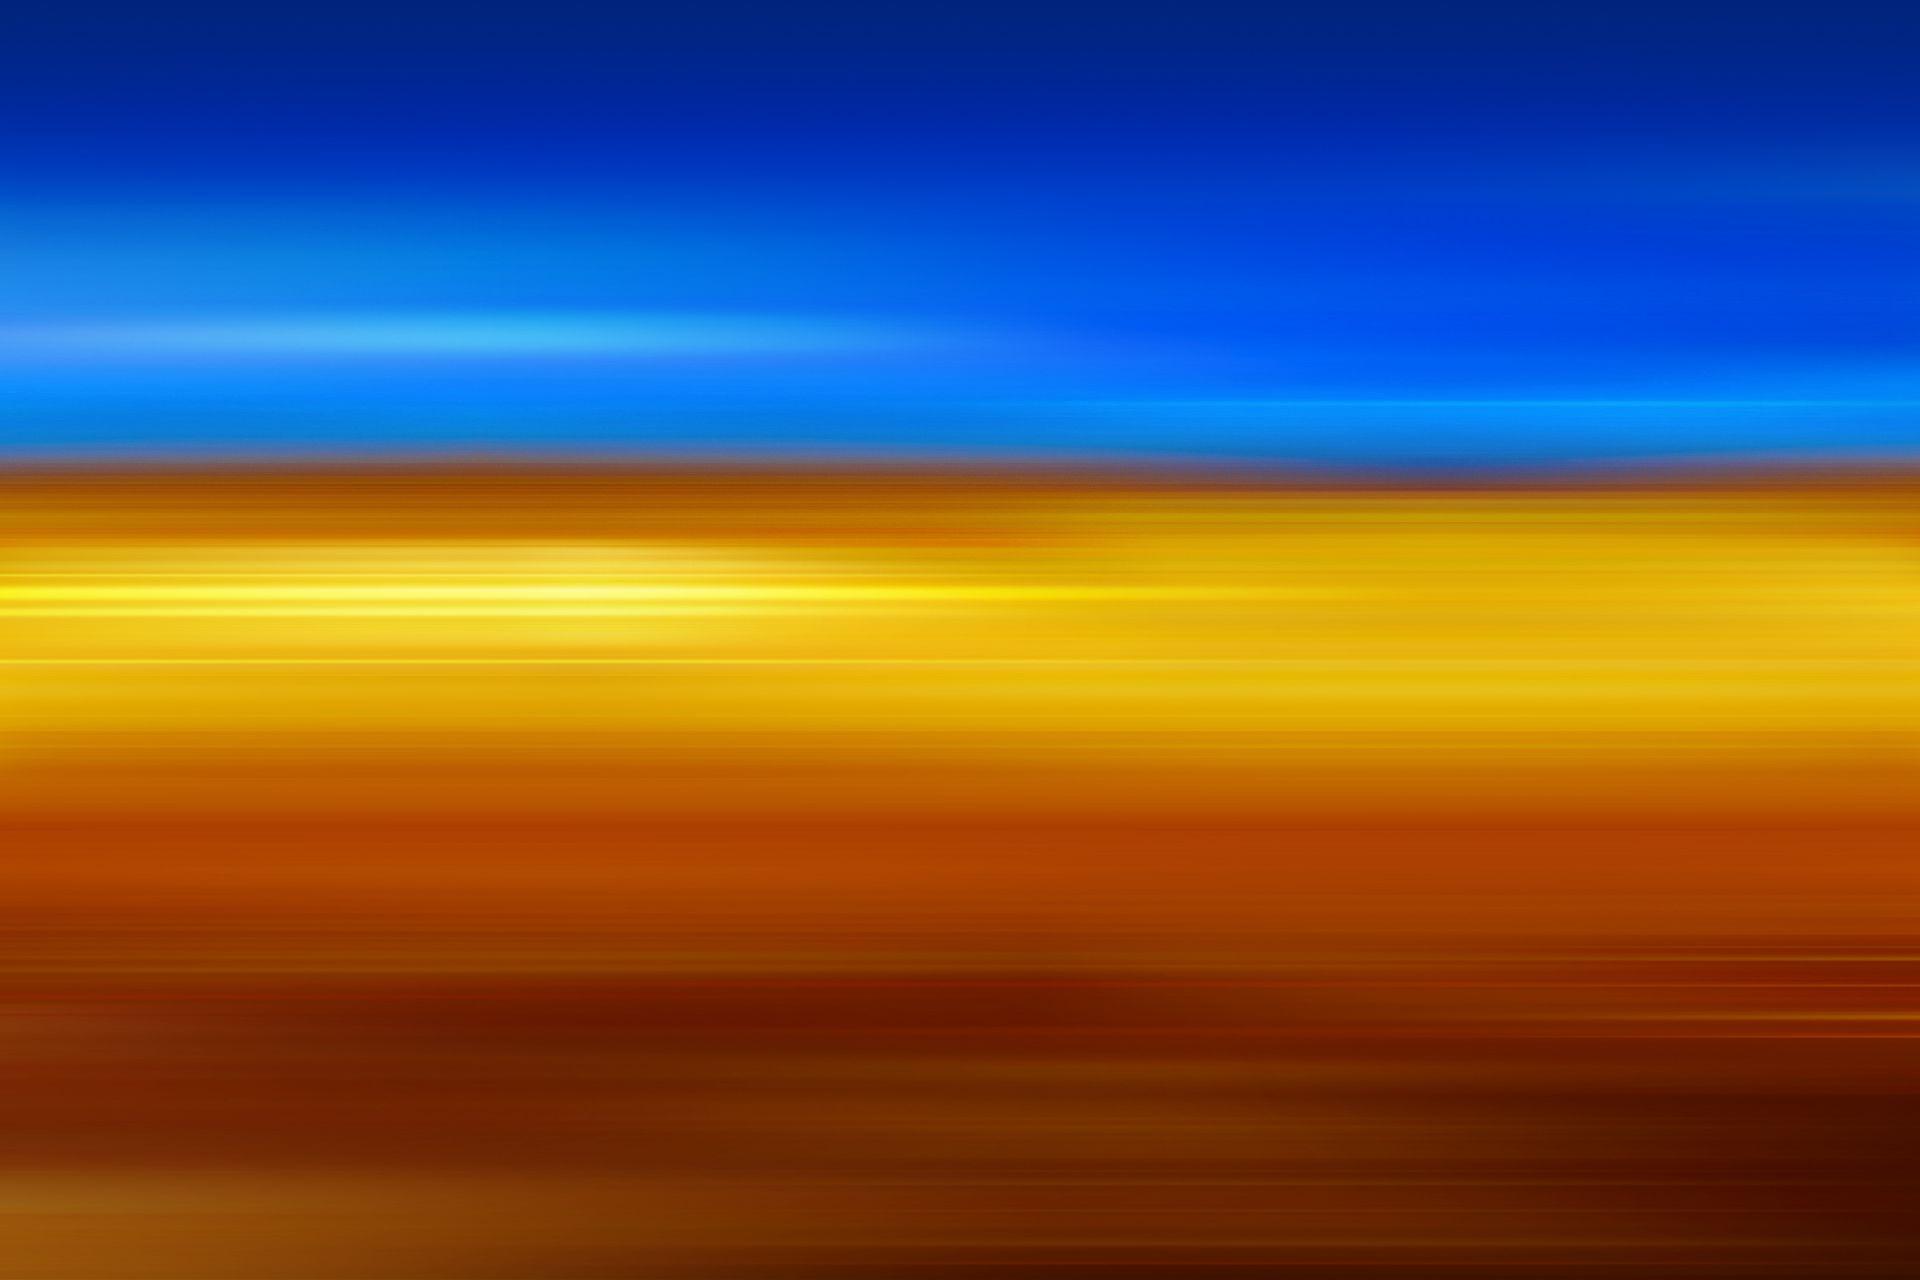 Galaxy Note 2 Wallpapers